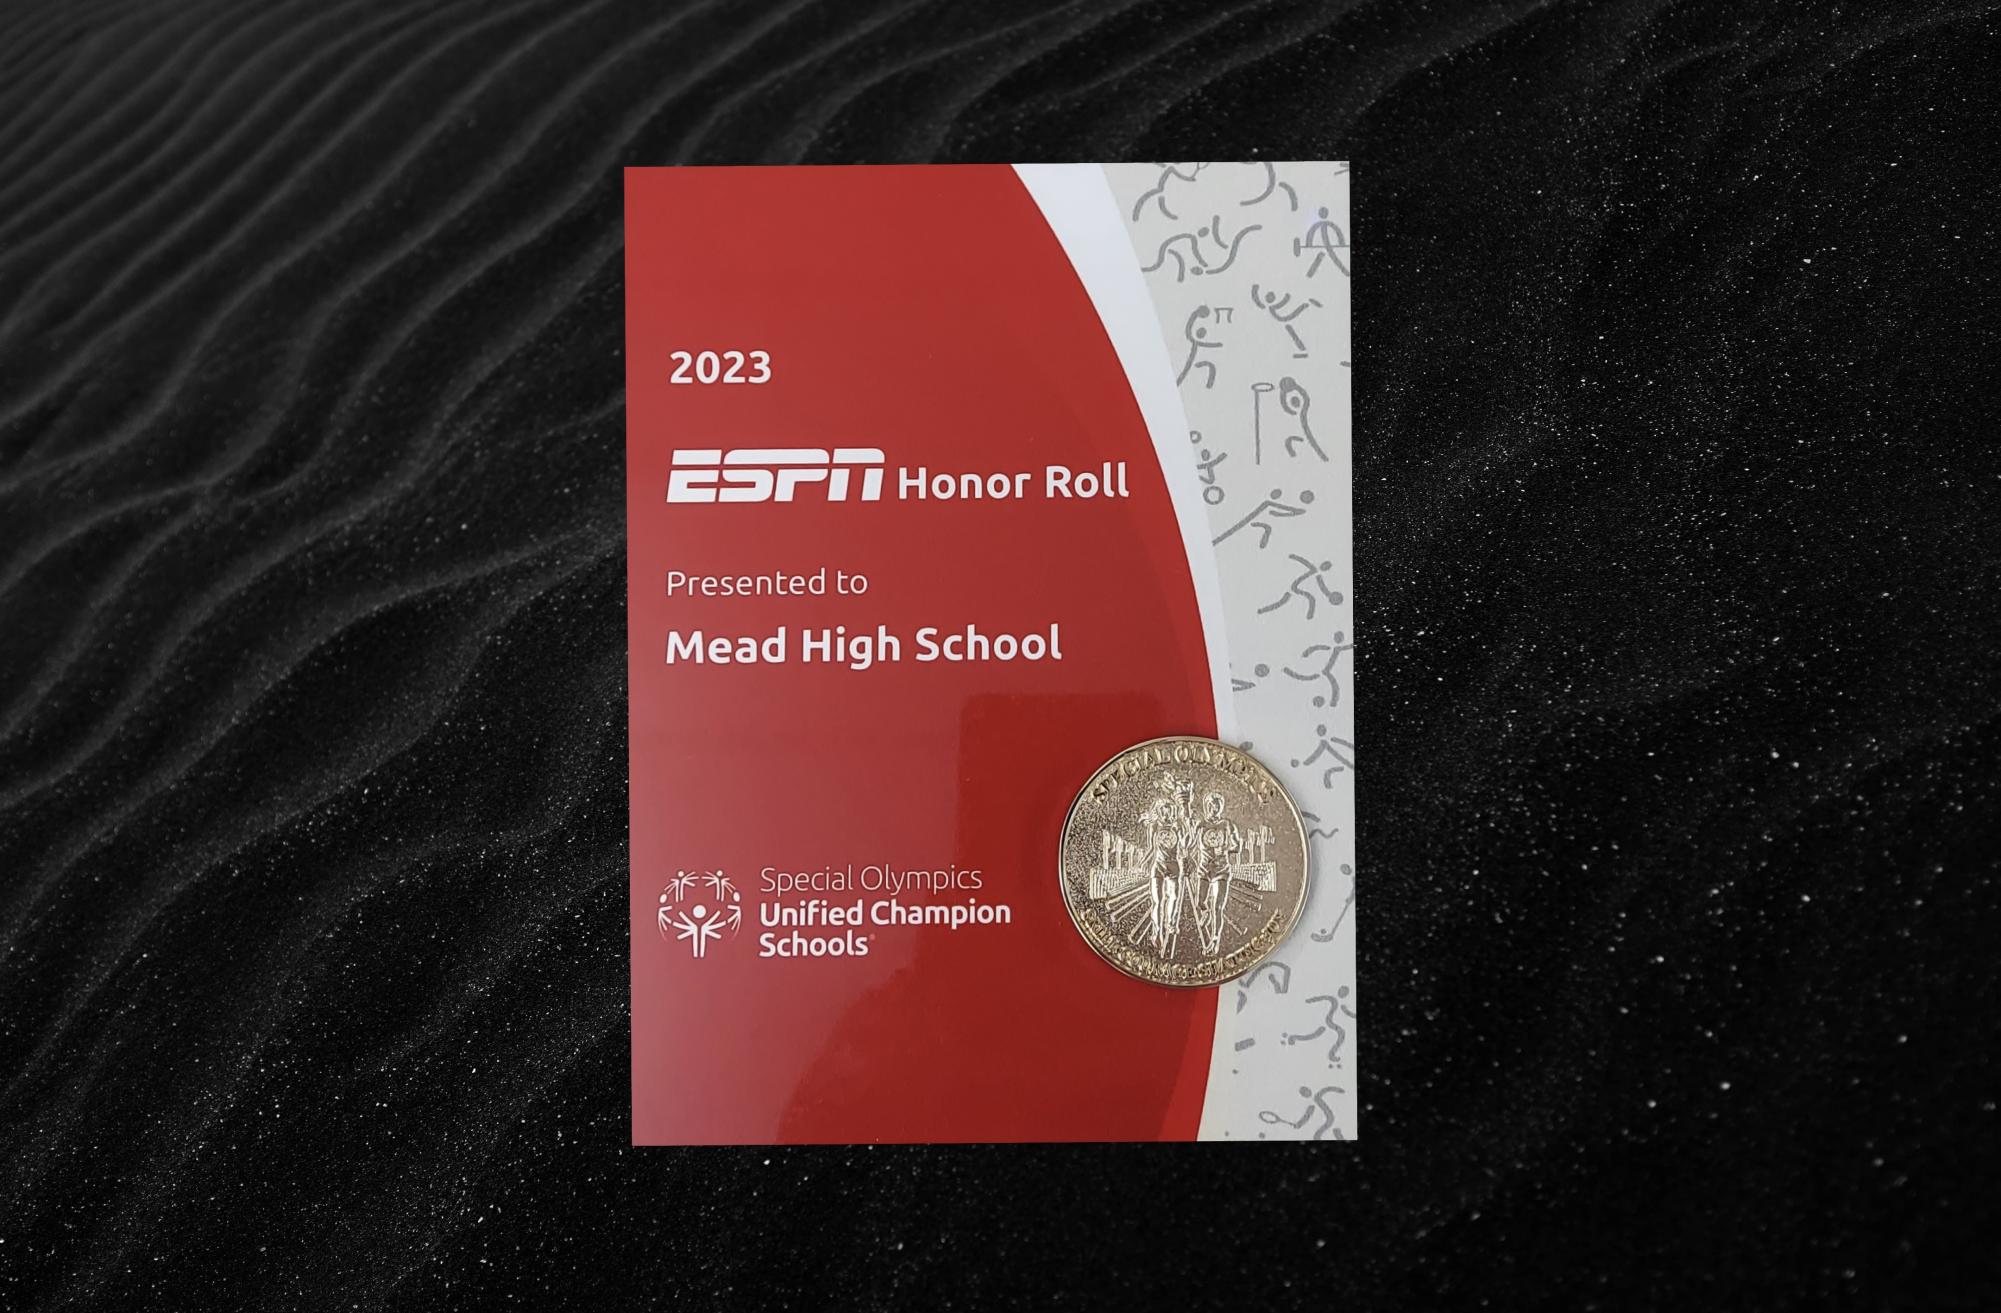 The ESPN Honor Roll award was given to Mead High School framed and in a sleek black box.